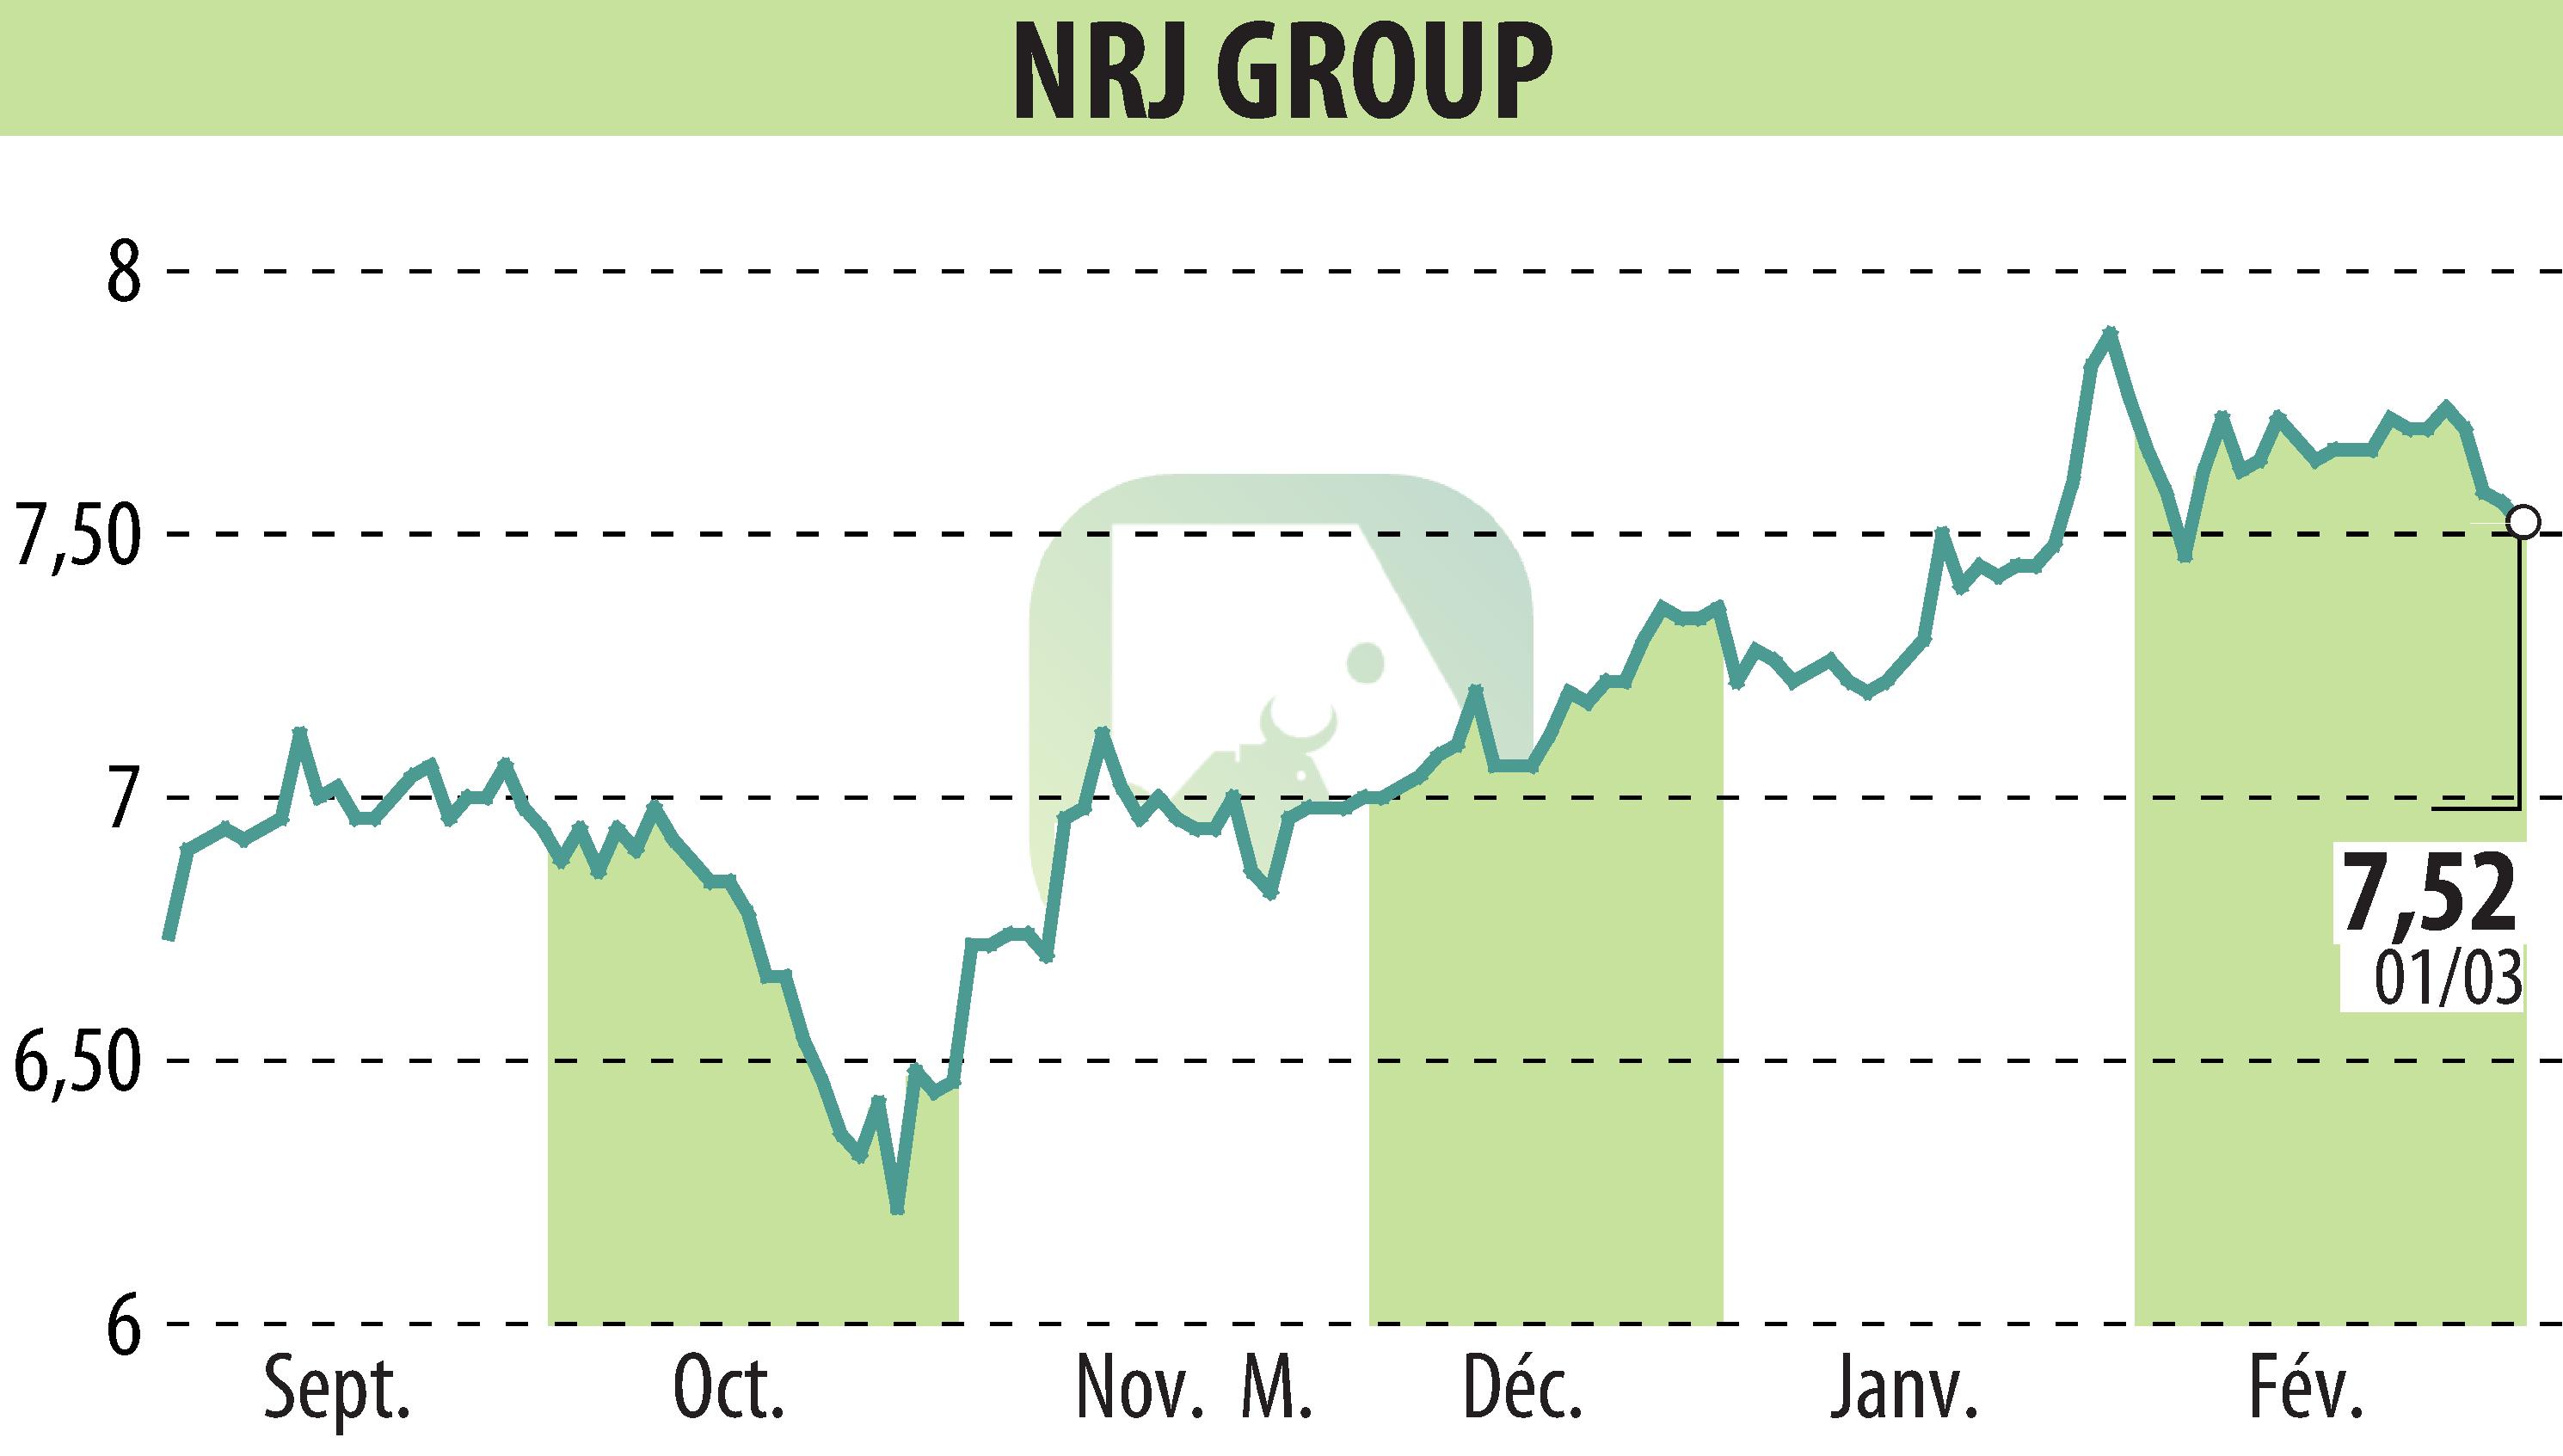 Stock price chart of NRJ GROUP (EPA:NRG) showing fluctuations